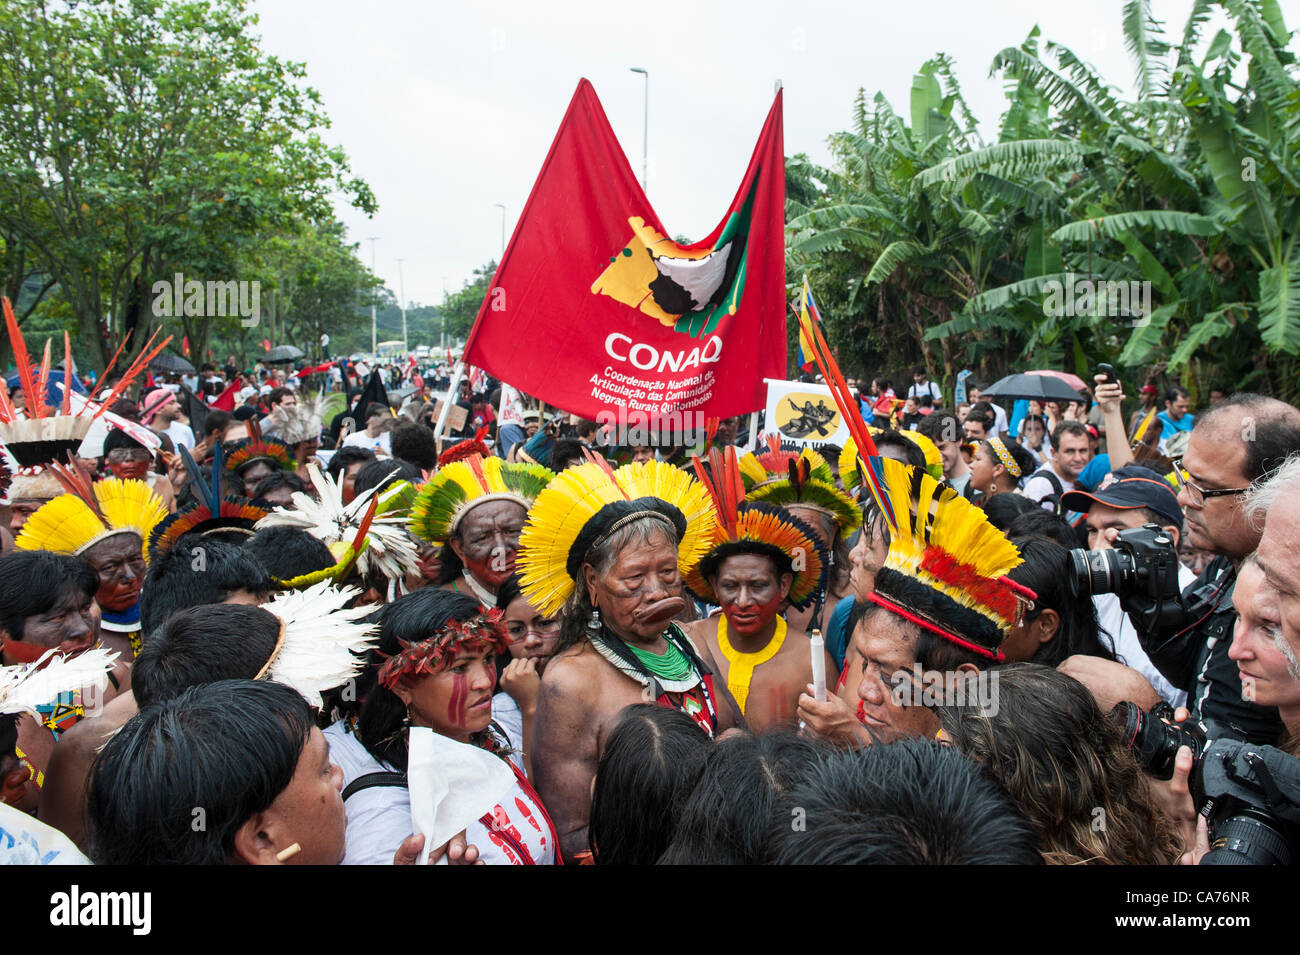 Kayapo Chief Raoni Metuktire, indigenous leaders Sheyla Juruna and Tabata Kuikuro and other indigenous leaders march at a demonstration by indigenous people, the Landless People's Movement (MST) and other civil society groups in front of the Riocentro United Nations conference. The demonstrators wanting to hand in a petition against the building of dams in the Amazon, are kept out of earshot and invisible to the UN conference. The United Nations Conference on Sustainable Development (Rio+20), Rio de Janeiro, Brazil, 20th June 2012. Photo © Sue Cunningham. Stock Photo